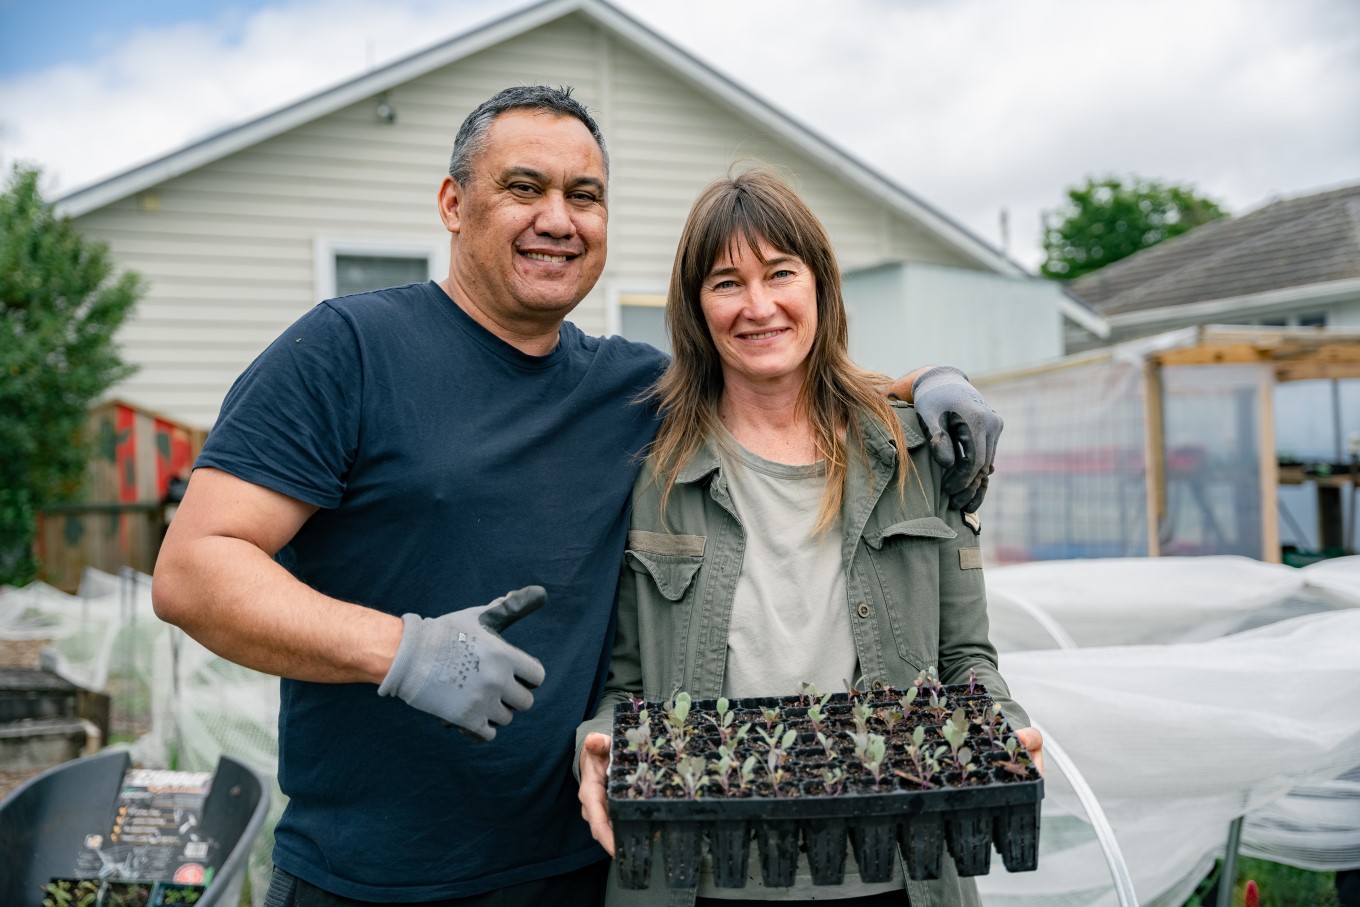 Dalton Neho and Lila Kuka from Awhi Mai Te Atatū: Growing as a Community want to show that using regenerative practices, even marginal land can be converted into a kai-growing space.